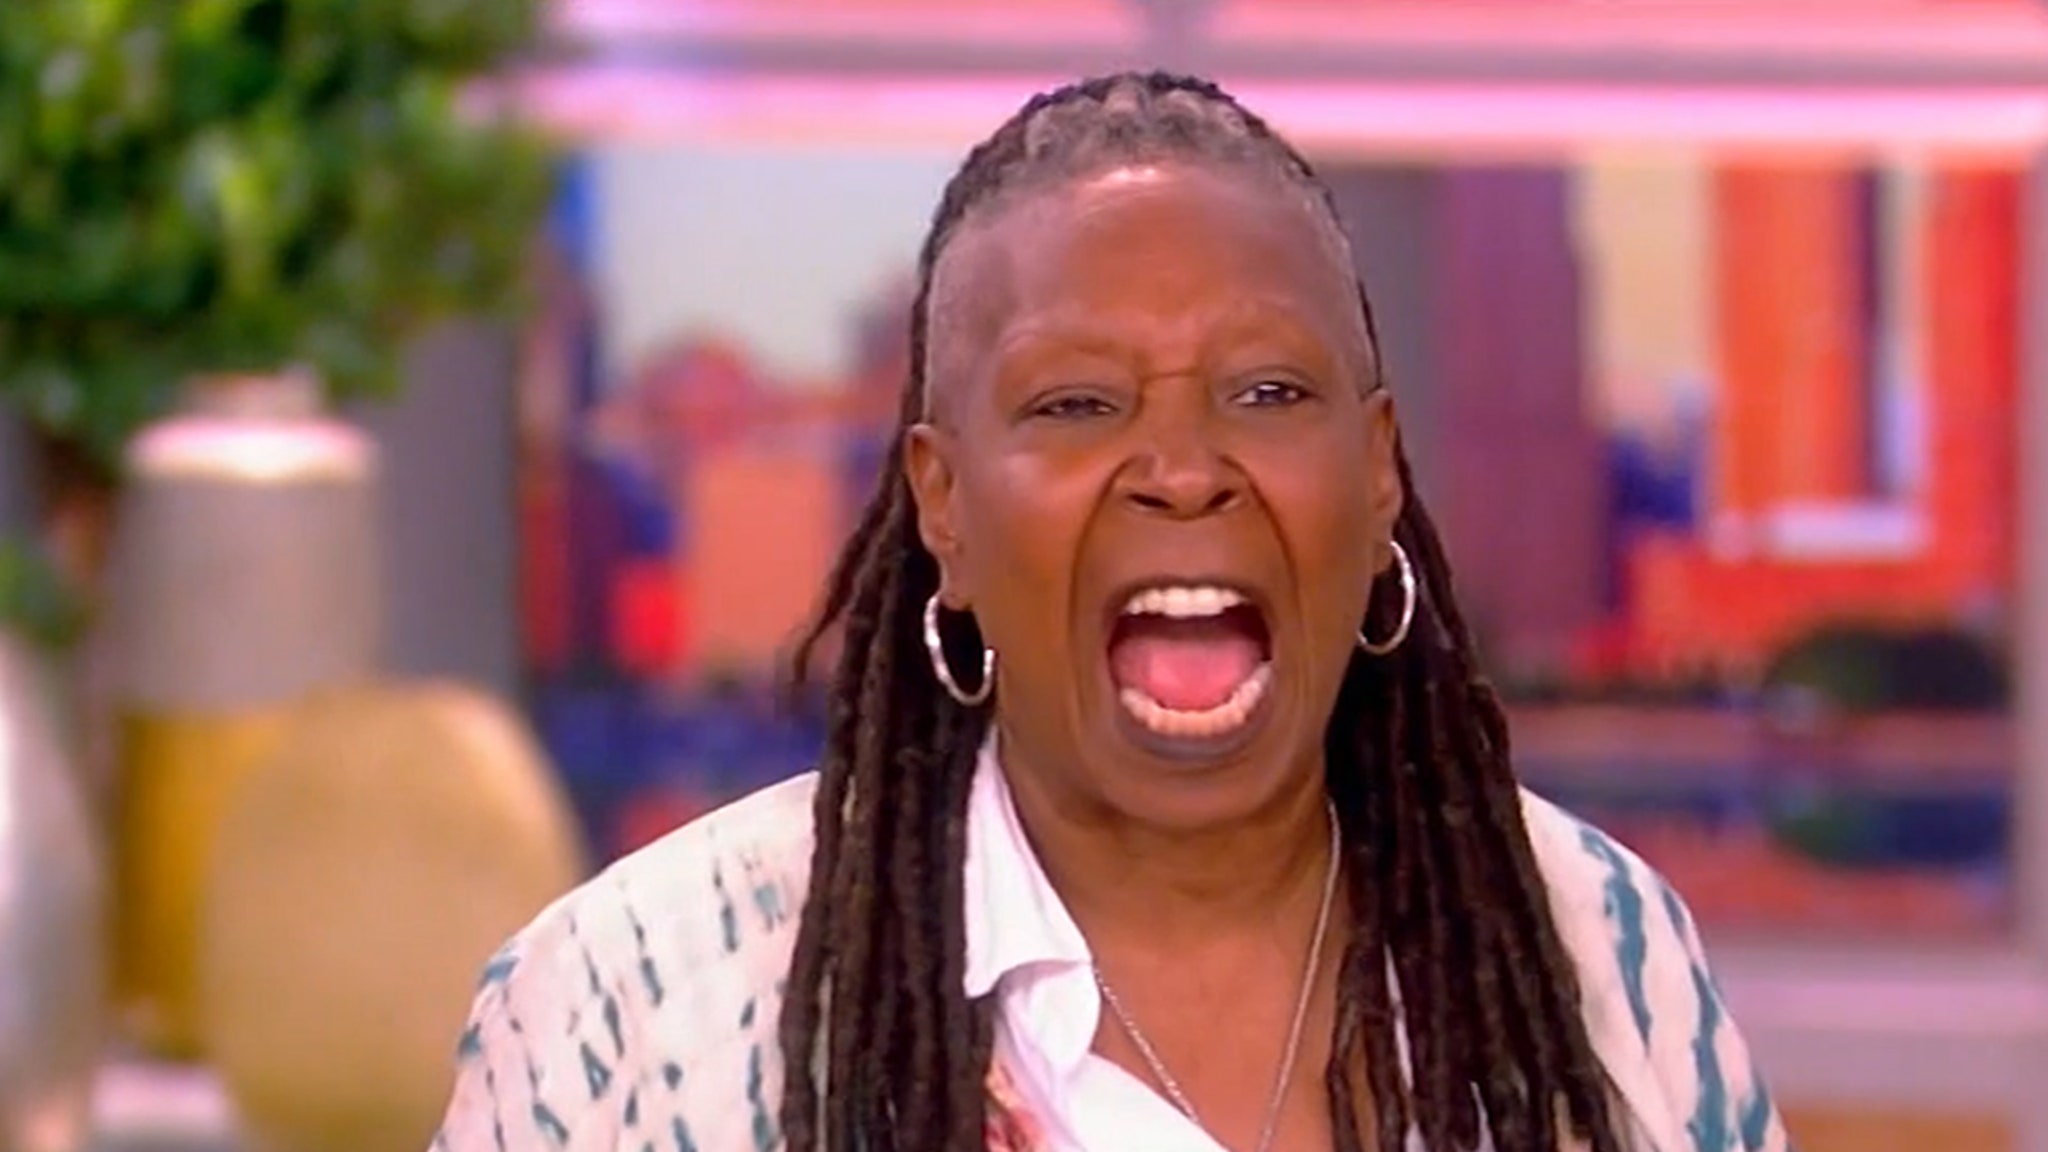 Whoopi Goldberg and Joy Behar overjoyed with Trump's conviction on 'The View'